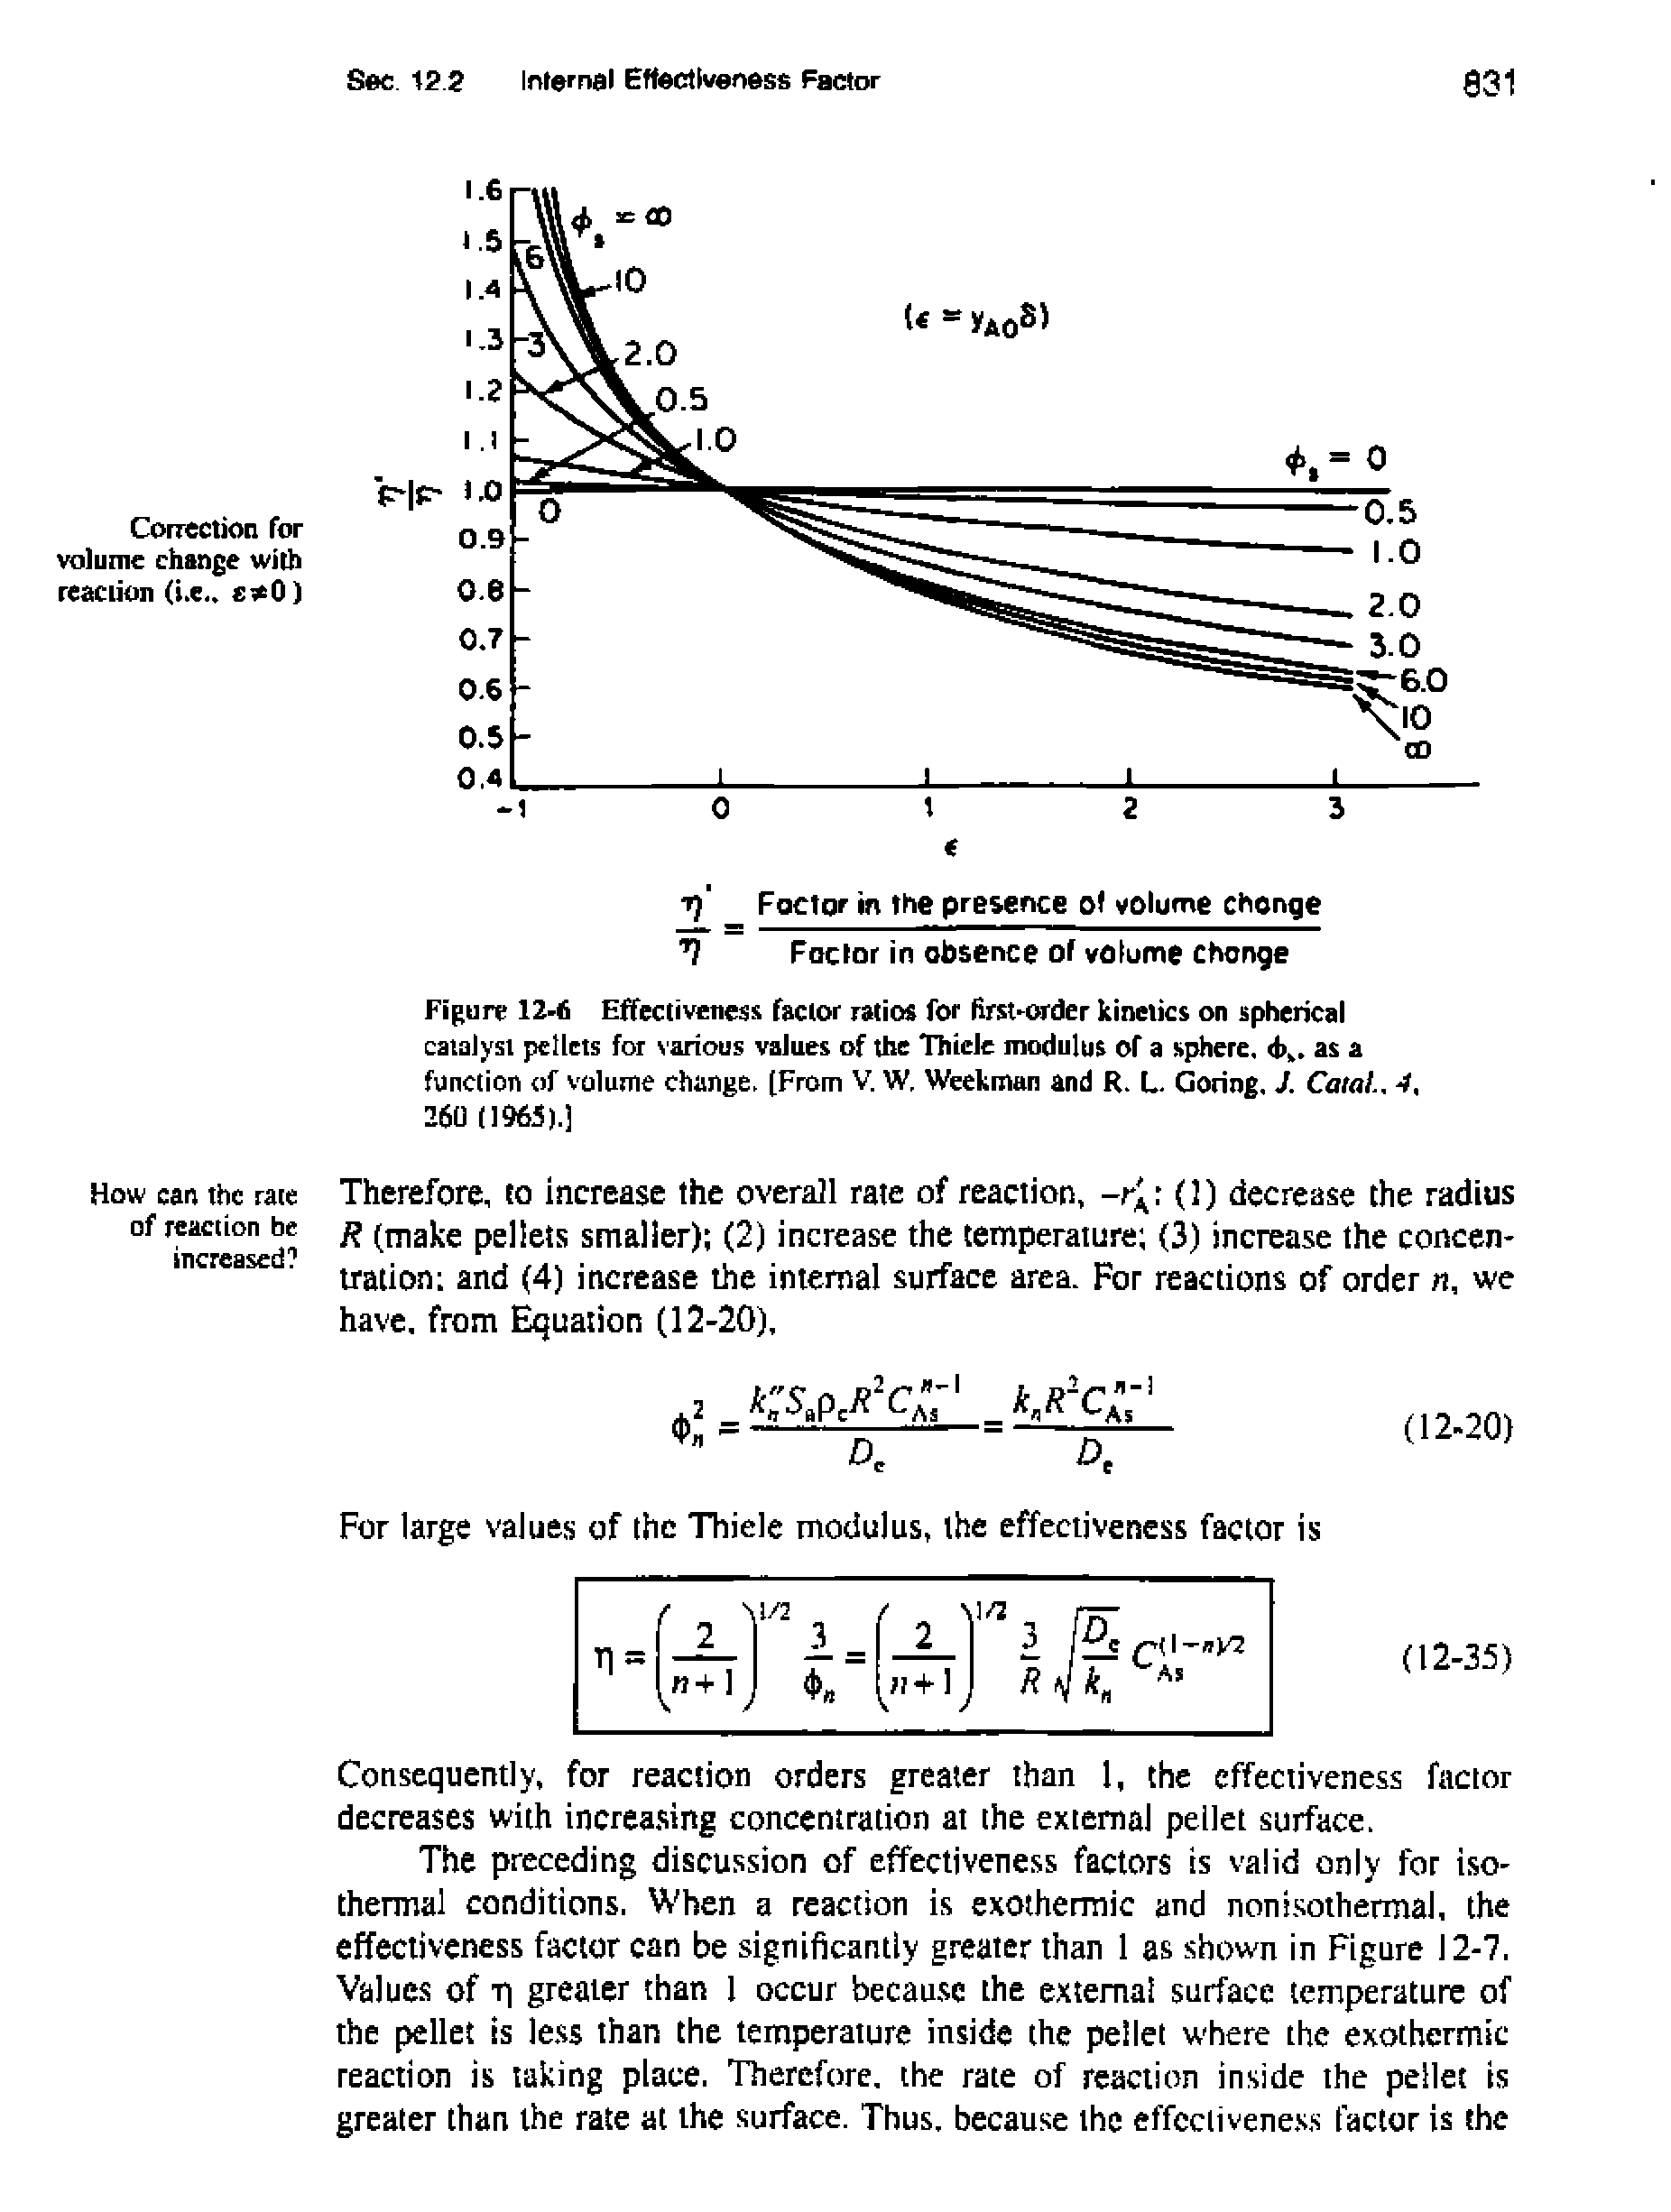 Figure 12-6 Effectiveness factor ratios for first-order kinetics on spherical catalyst pellets for various values of the Thiele modulus of a sphere, (h.,. as a function of volume change. [From V. W, Weekman and R. L. Goring. J. Caial.. 4,...